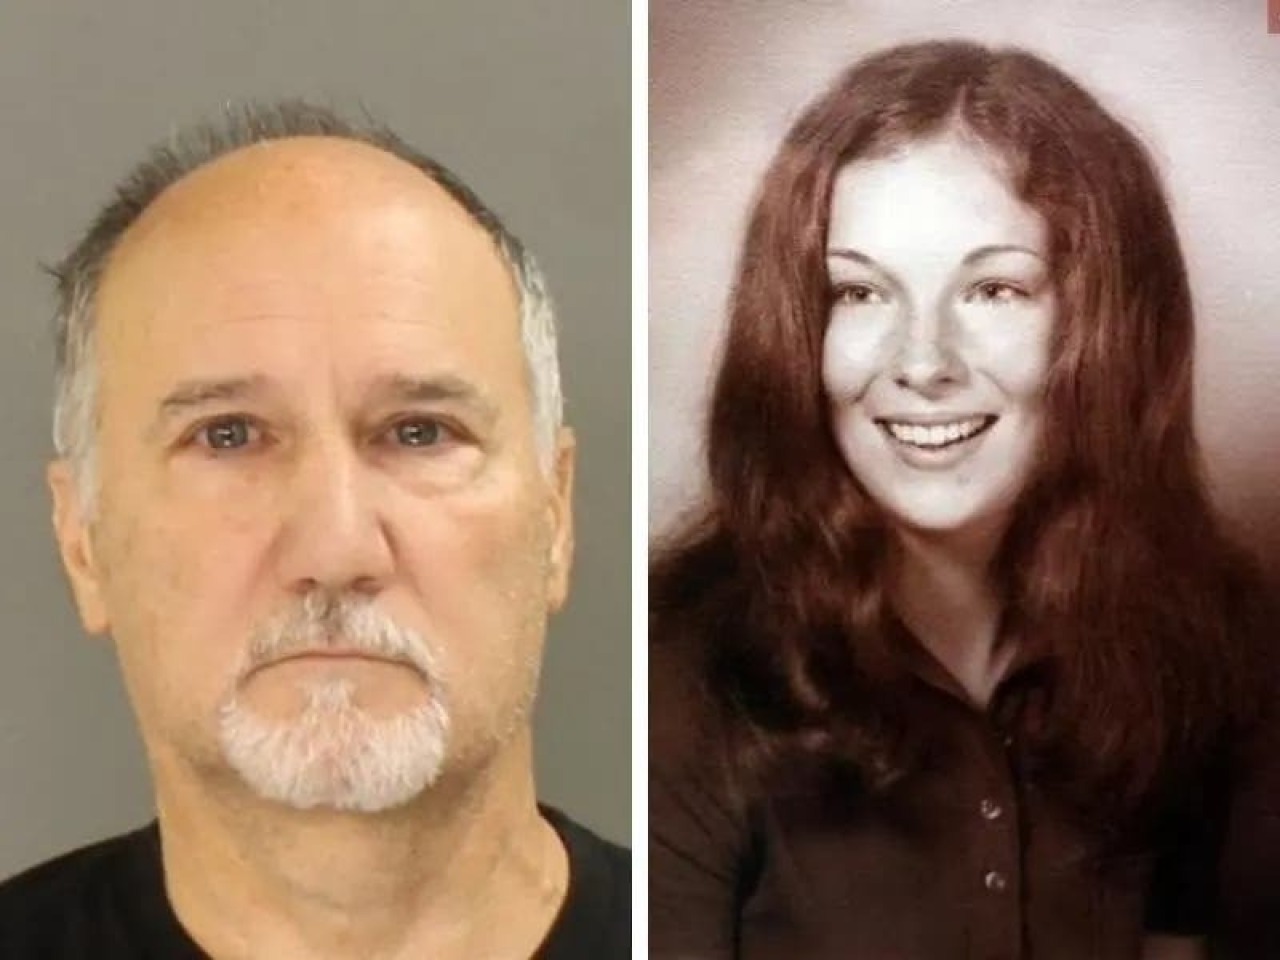 [IMAGE] 1975 PA Cold Case Killing Heads To Trial | Across Pennsylvania ...